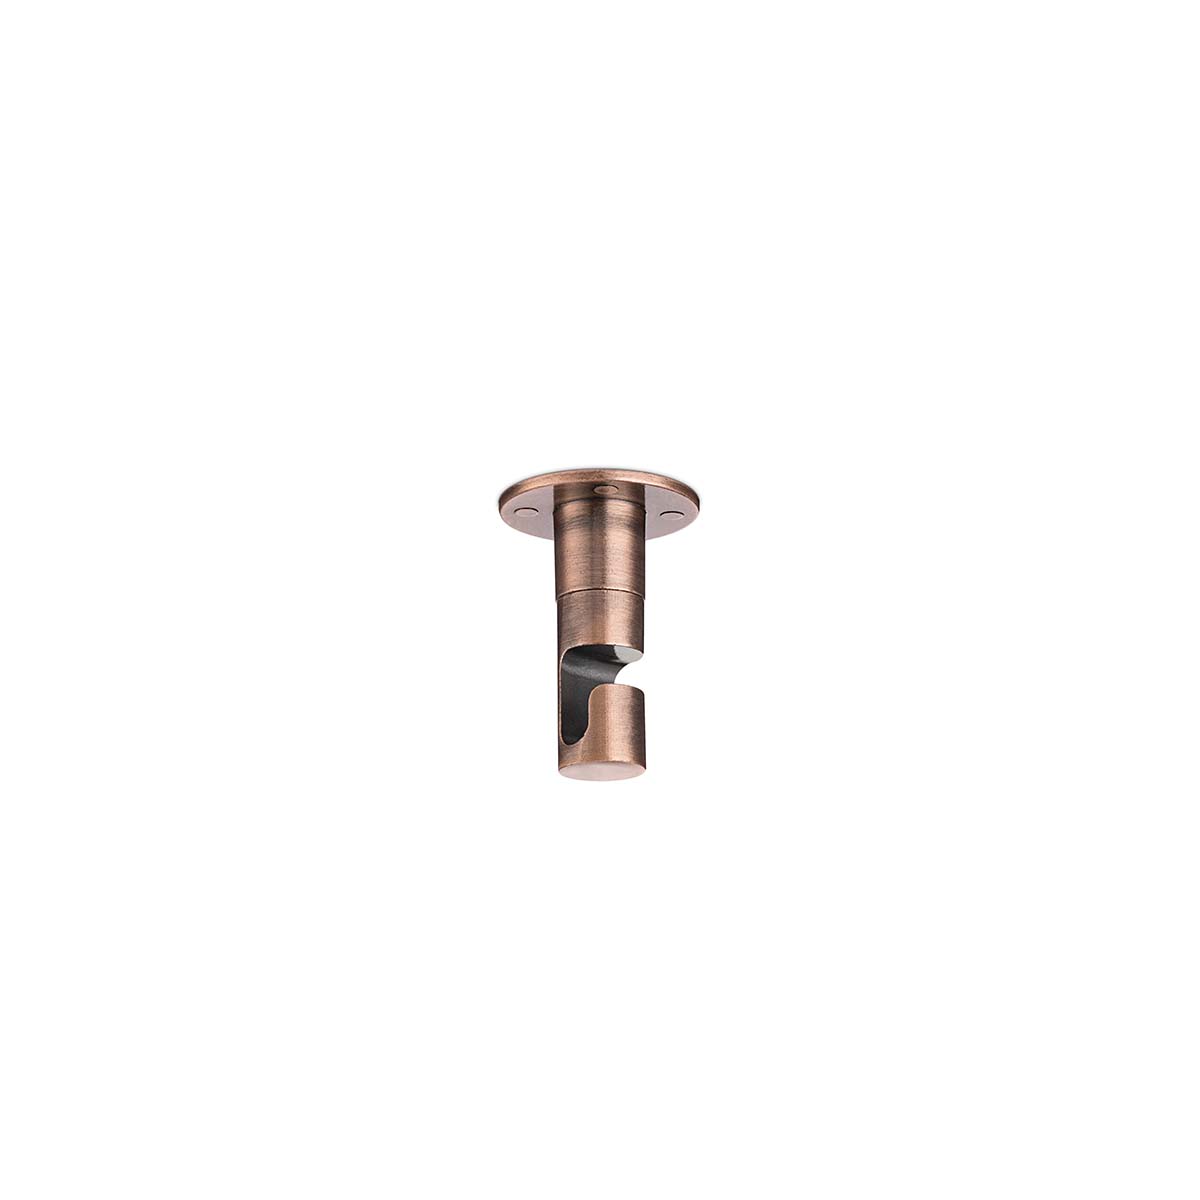 Tangla lighting - TLHG002CP - Metal cable hanger - mix and match - copper